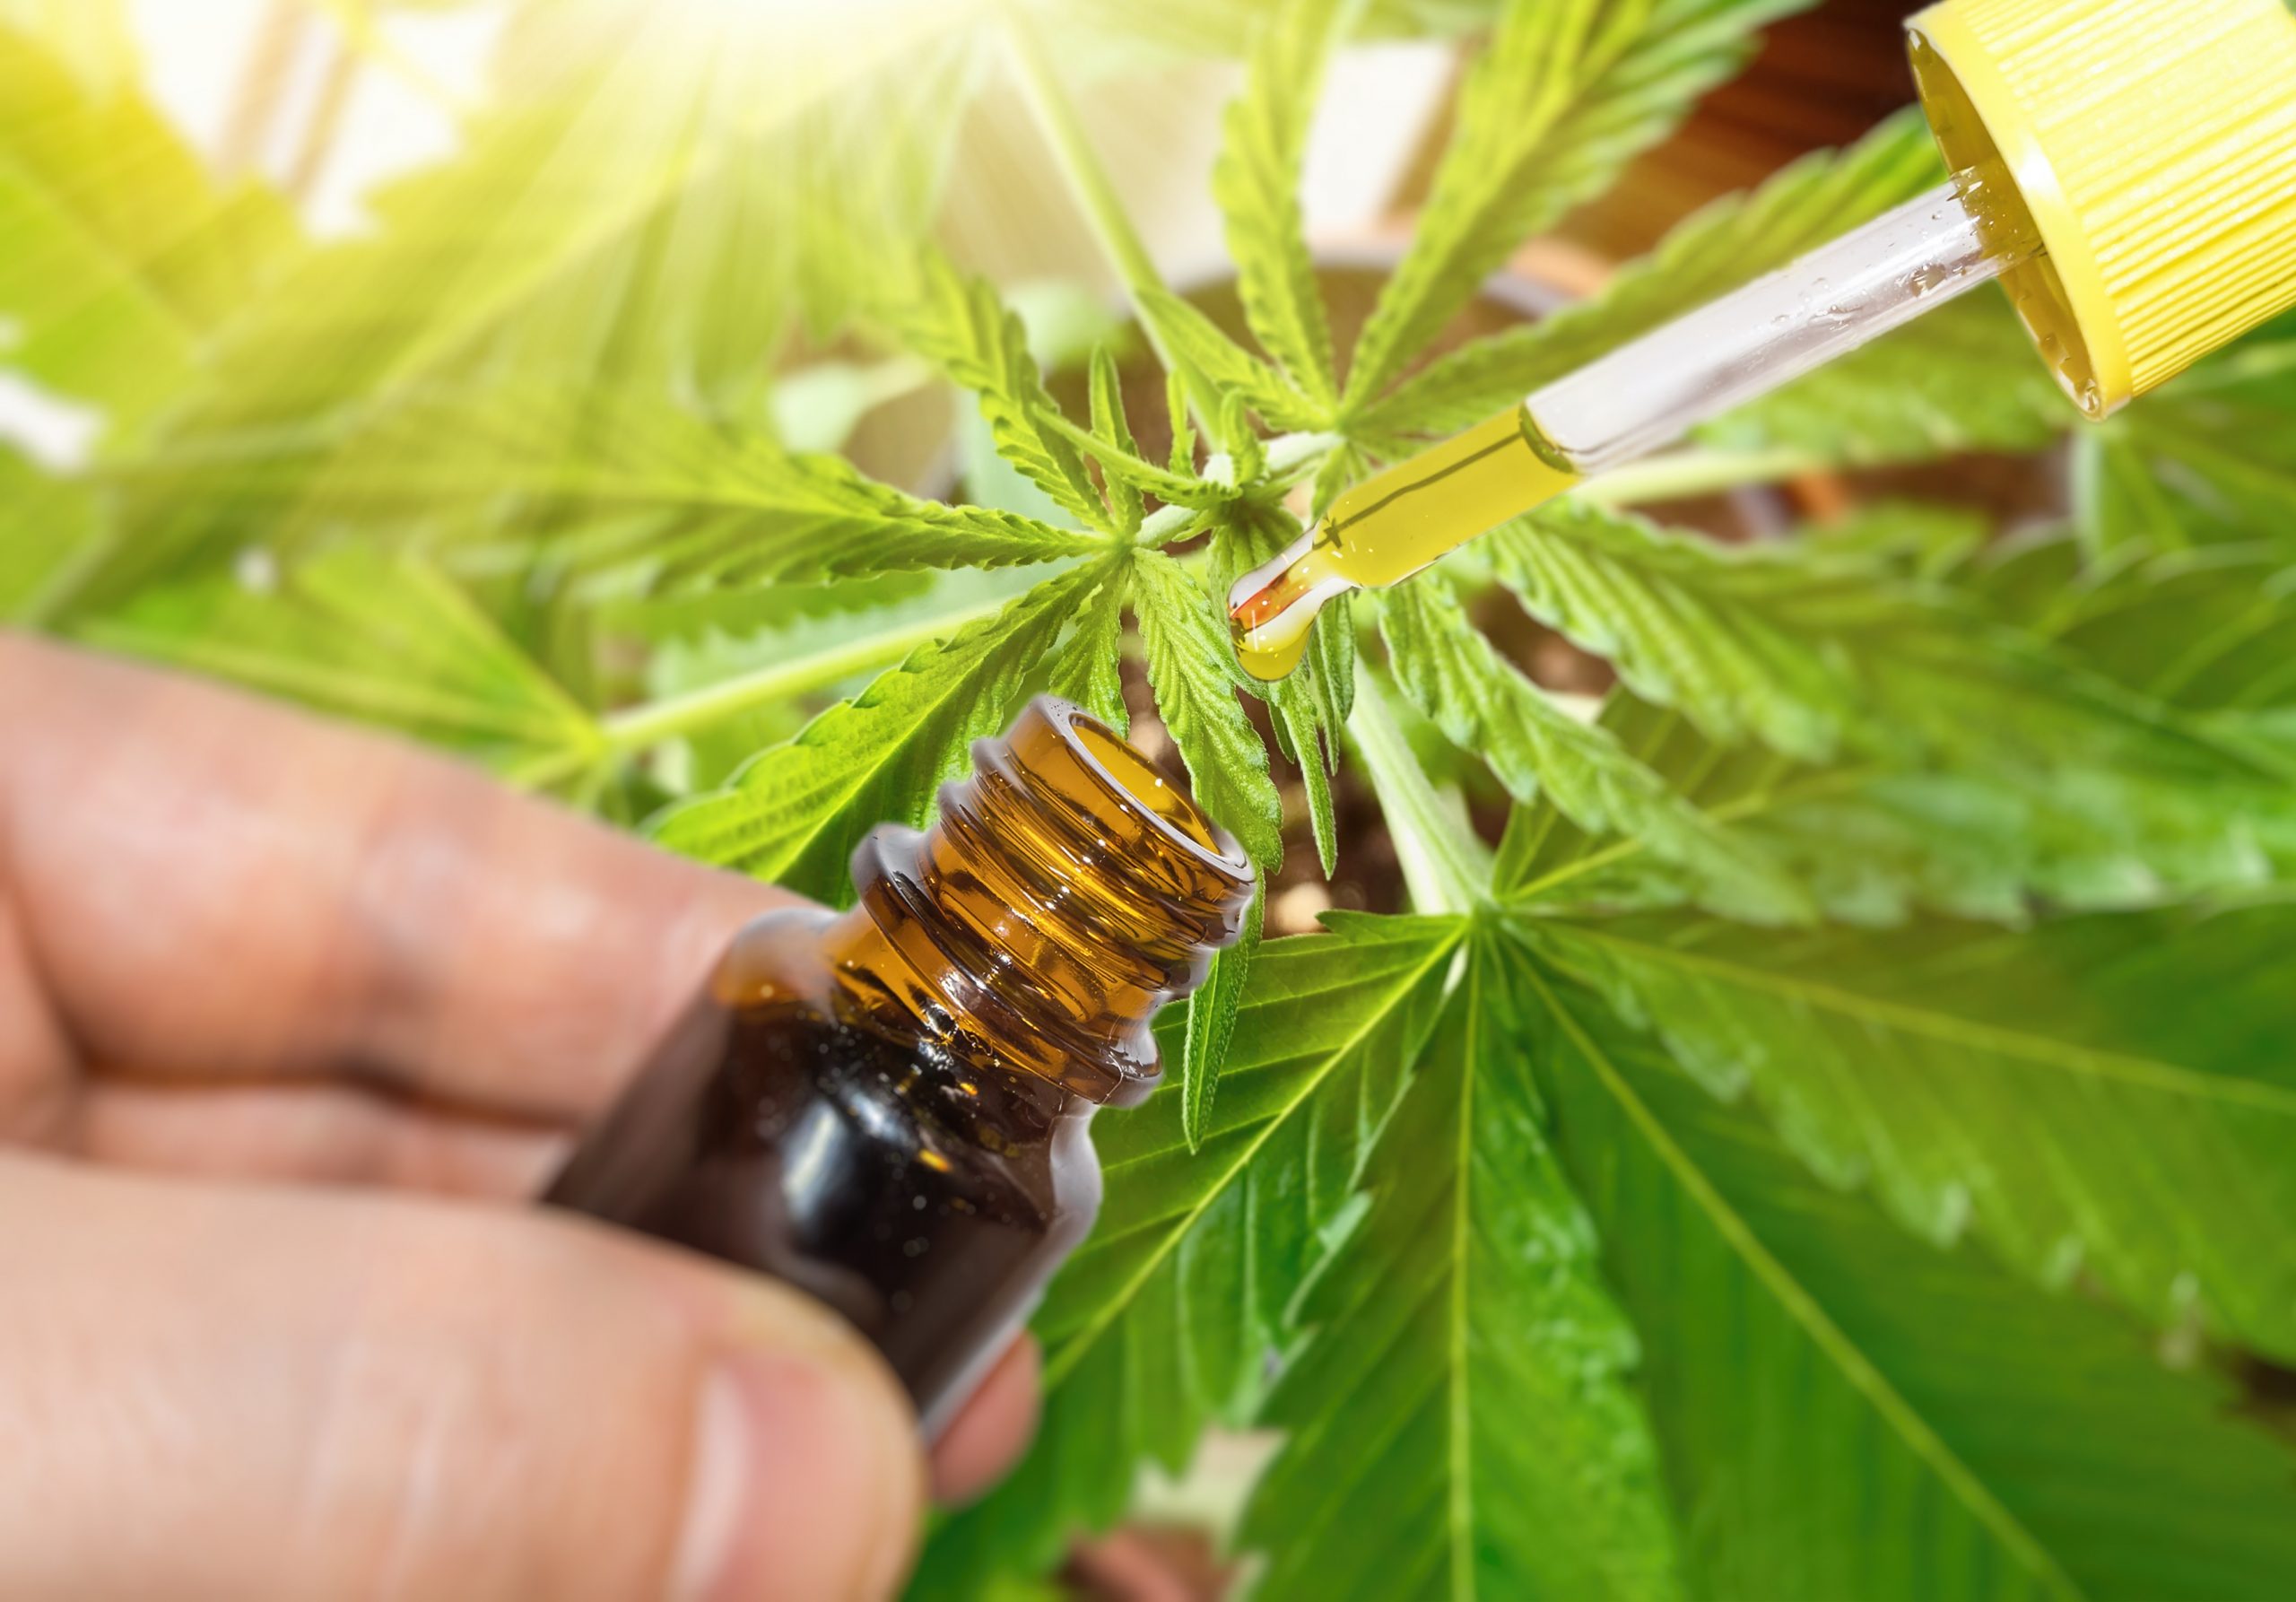 The CBD or Cannabidiol is one of the most popular compounds of the cannabis plant